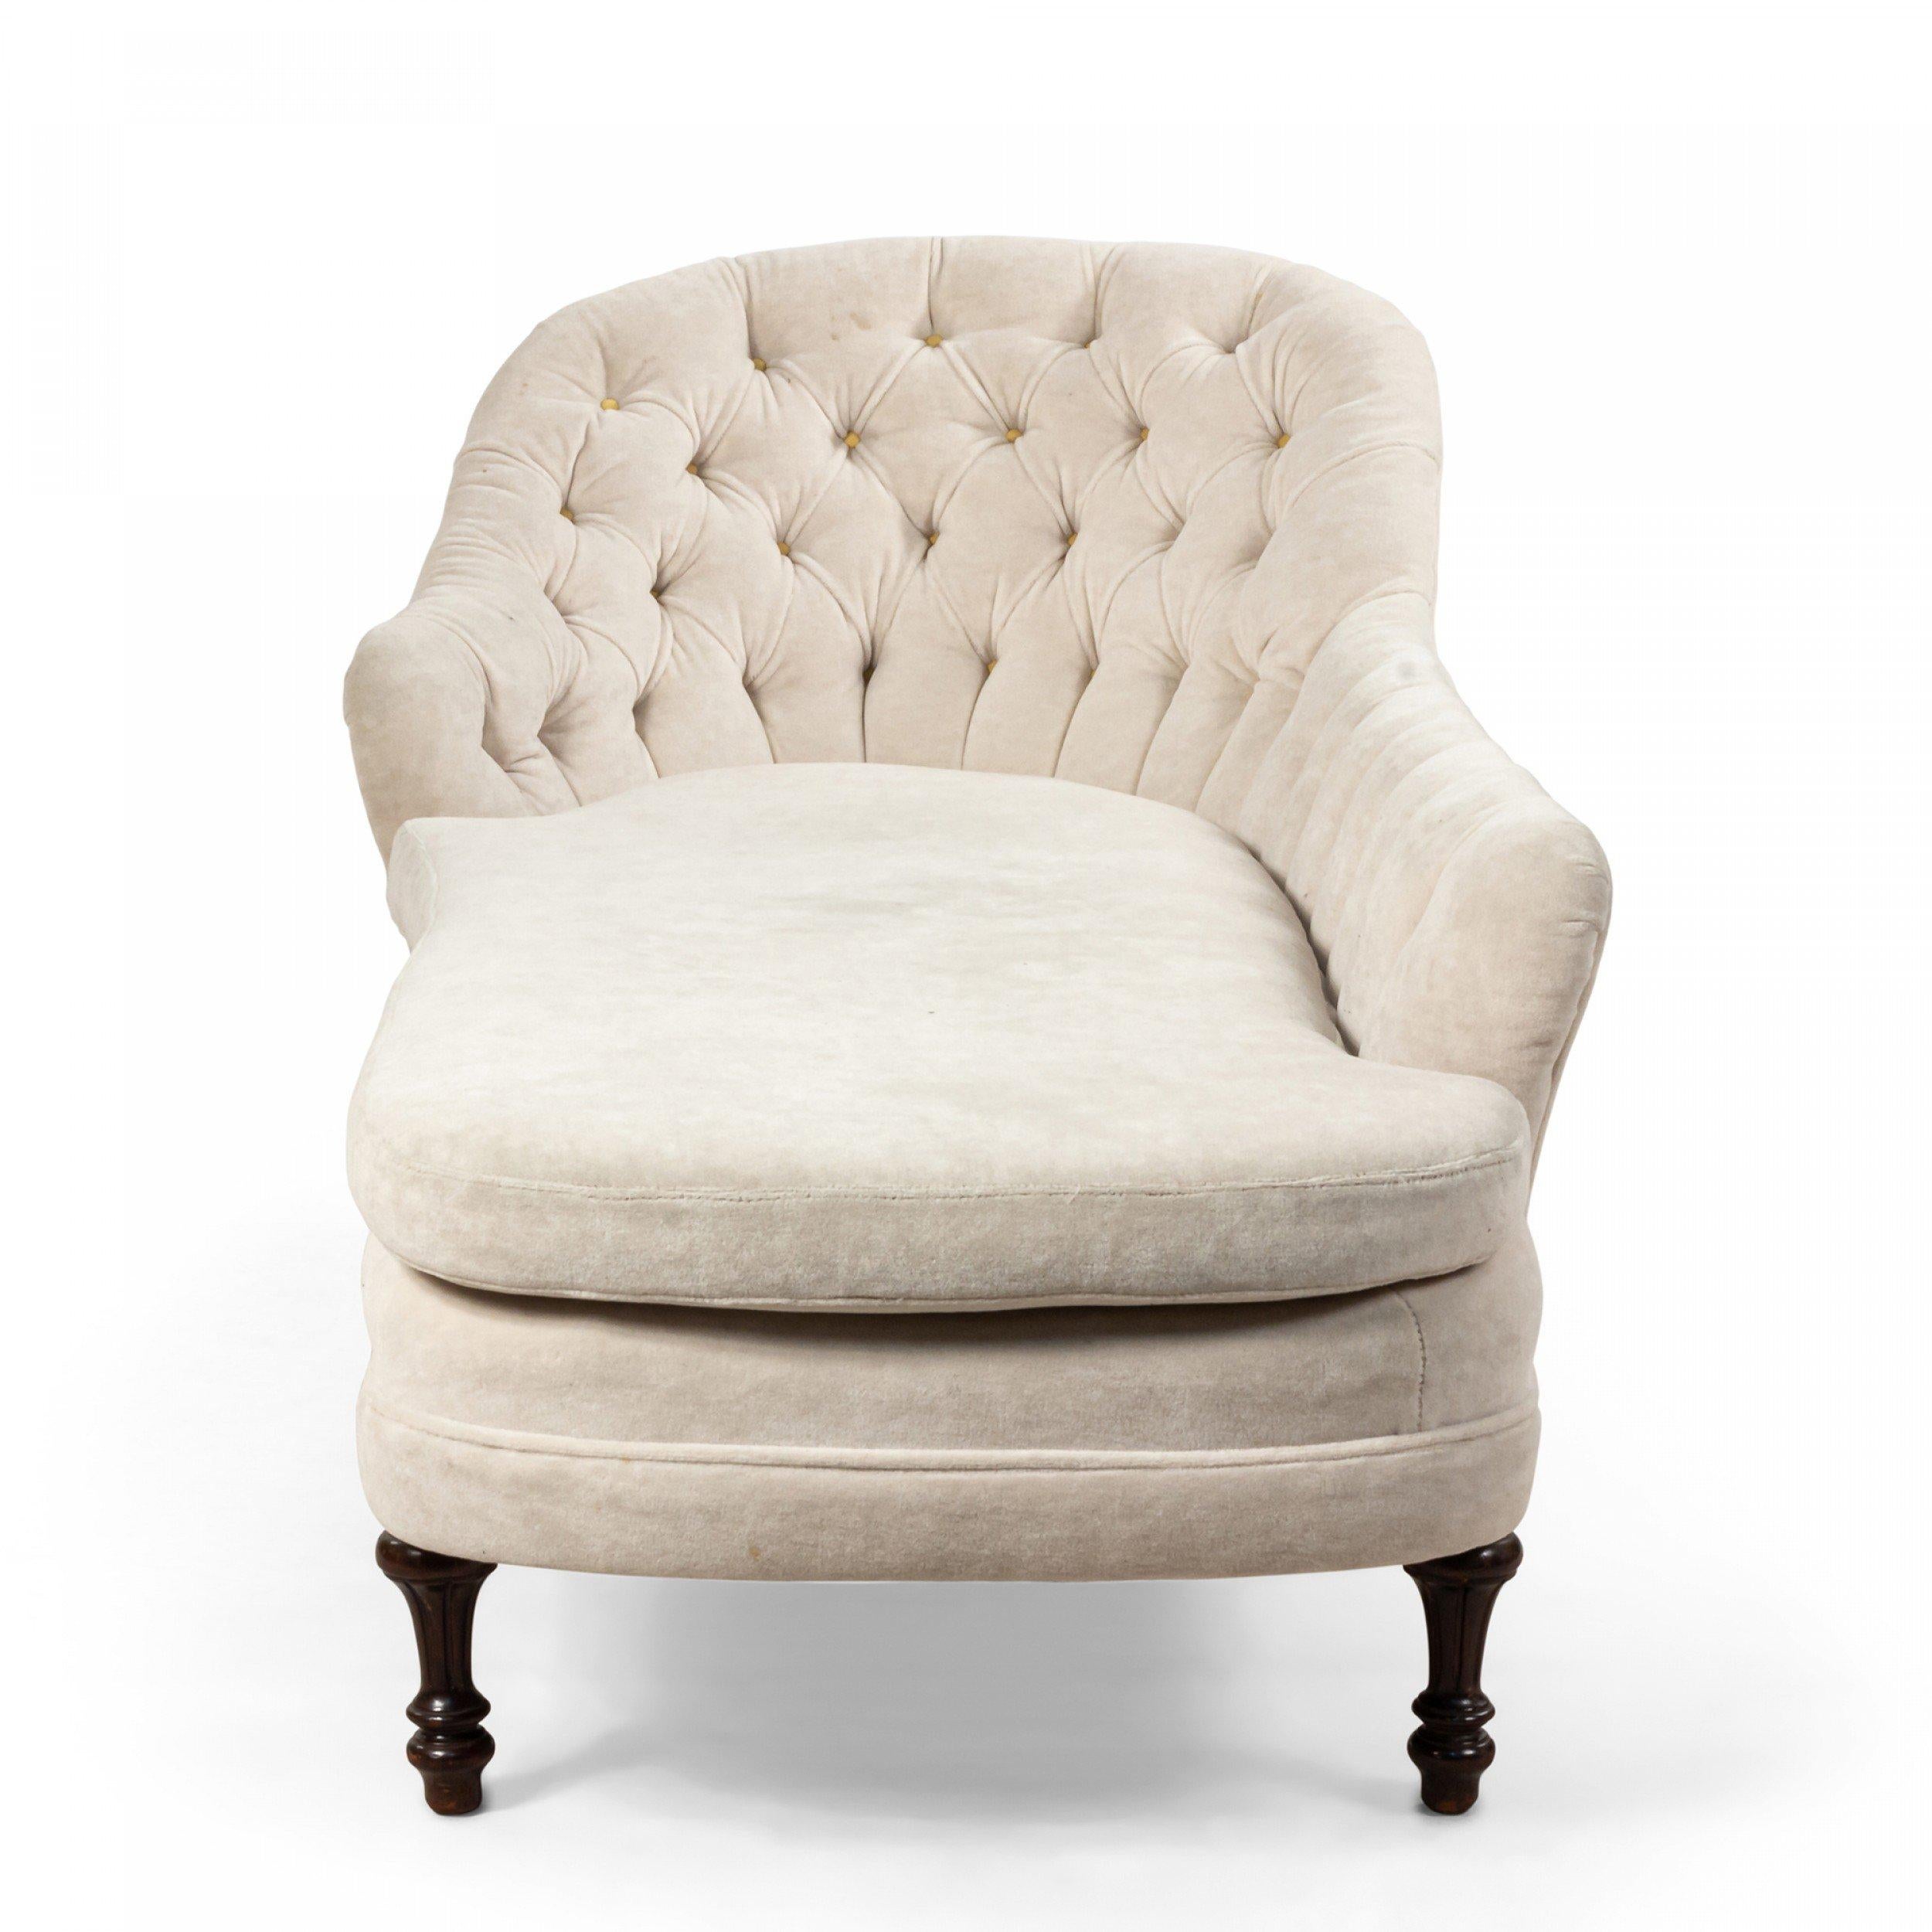 Fabric Victorian Style White Velvet Tufted Chaise Lounge